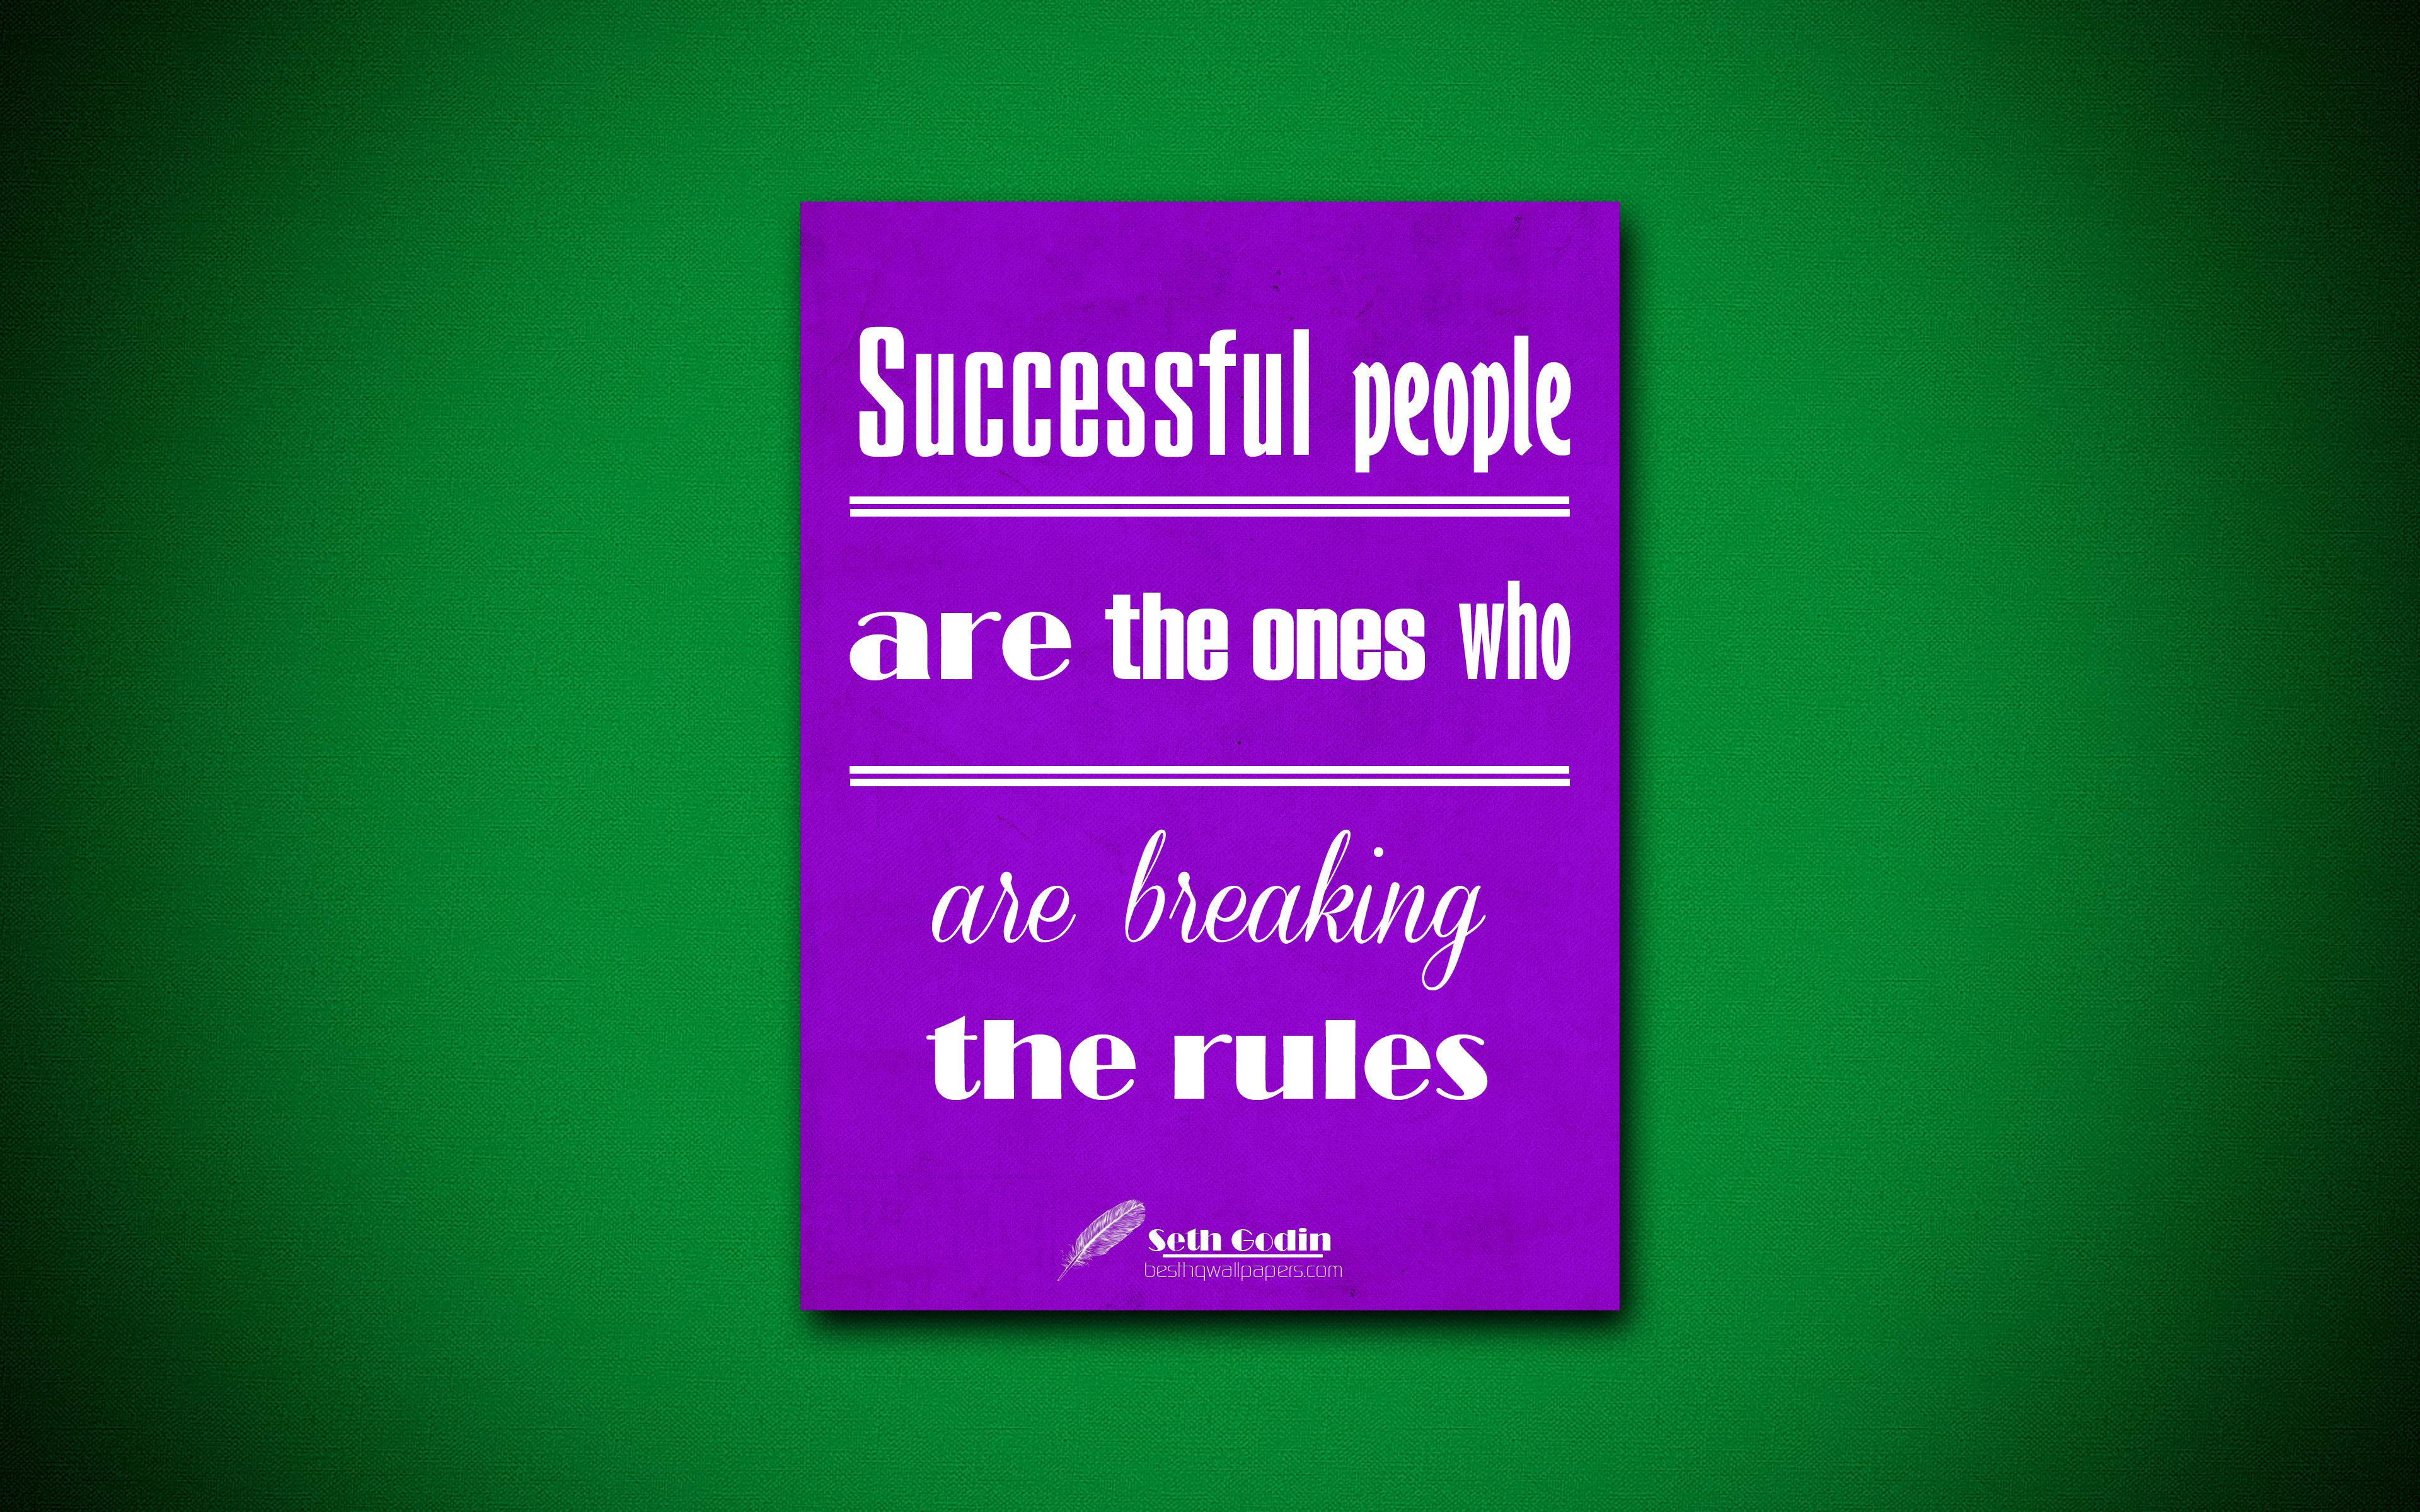 Download wallpaper Successful people are the ones who are breaking the rules, 4k, business quotes, Seth Godin, motivation, inspiration for desktop with resolution 3840x2400. High Quality HD picture wallpaper